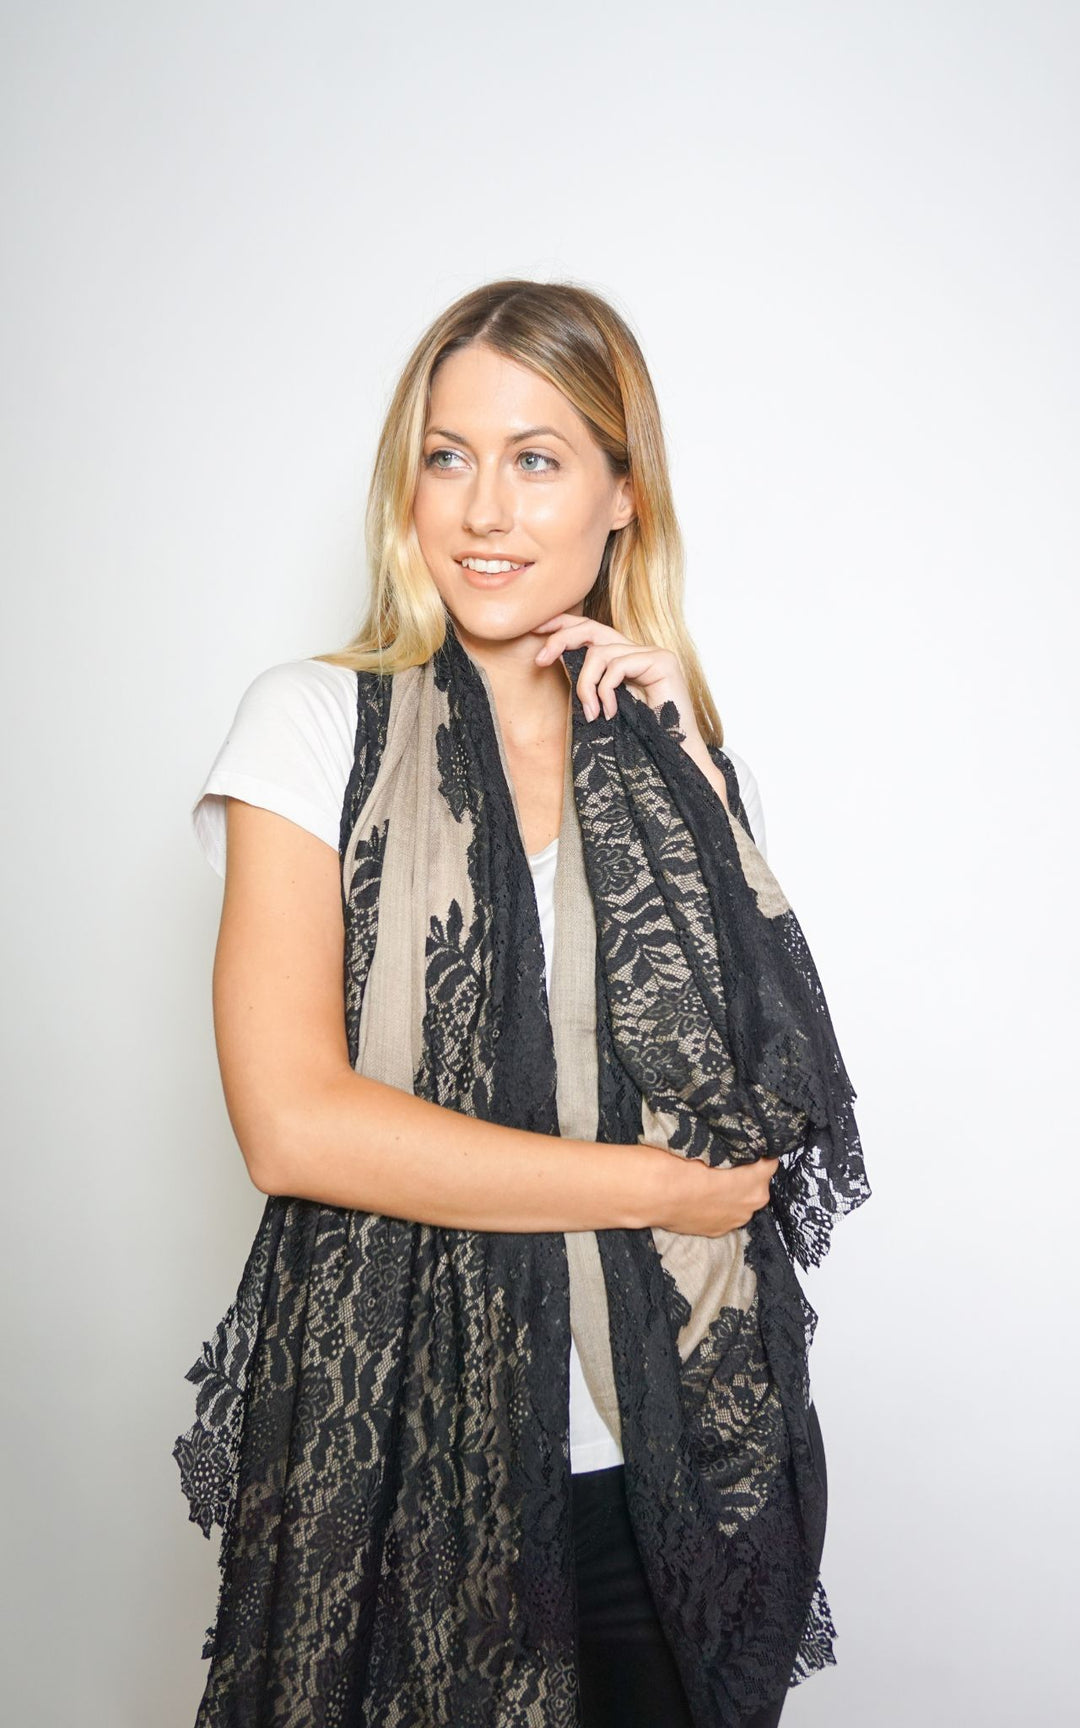 Beige and Black Lace Scarf